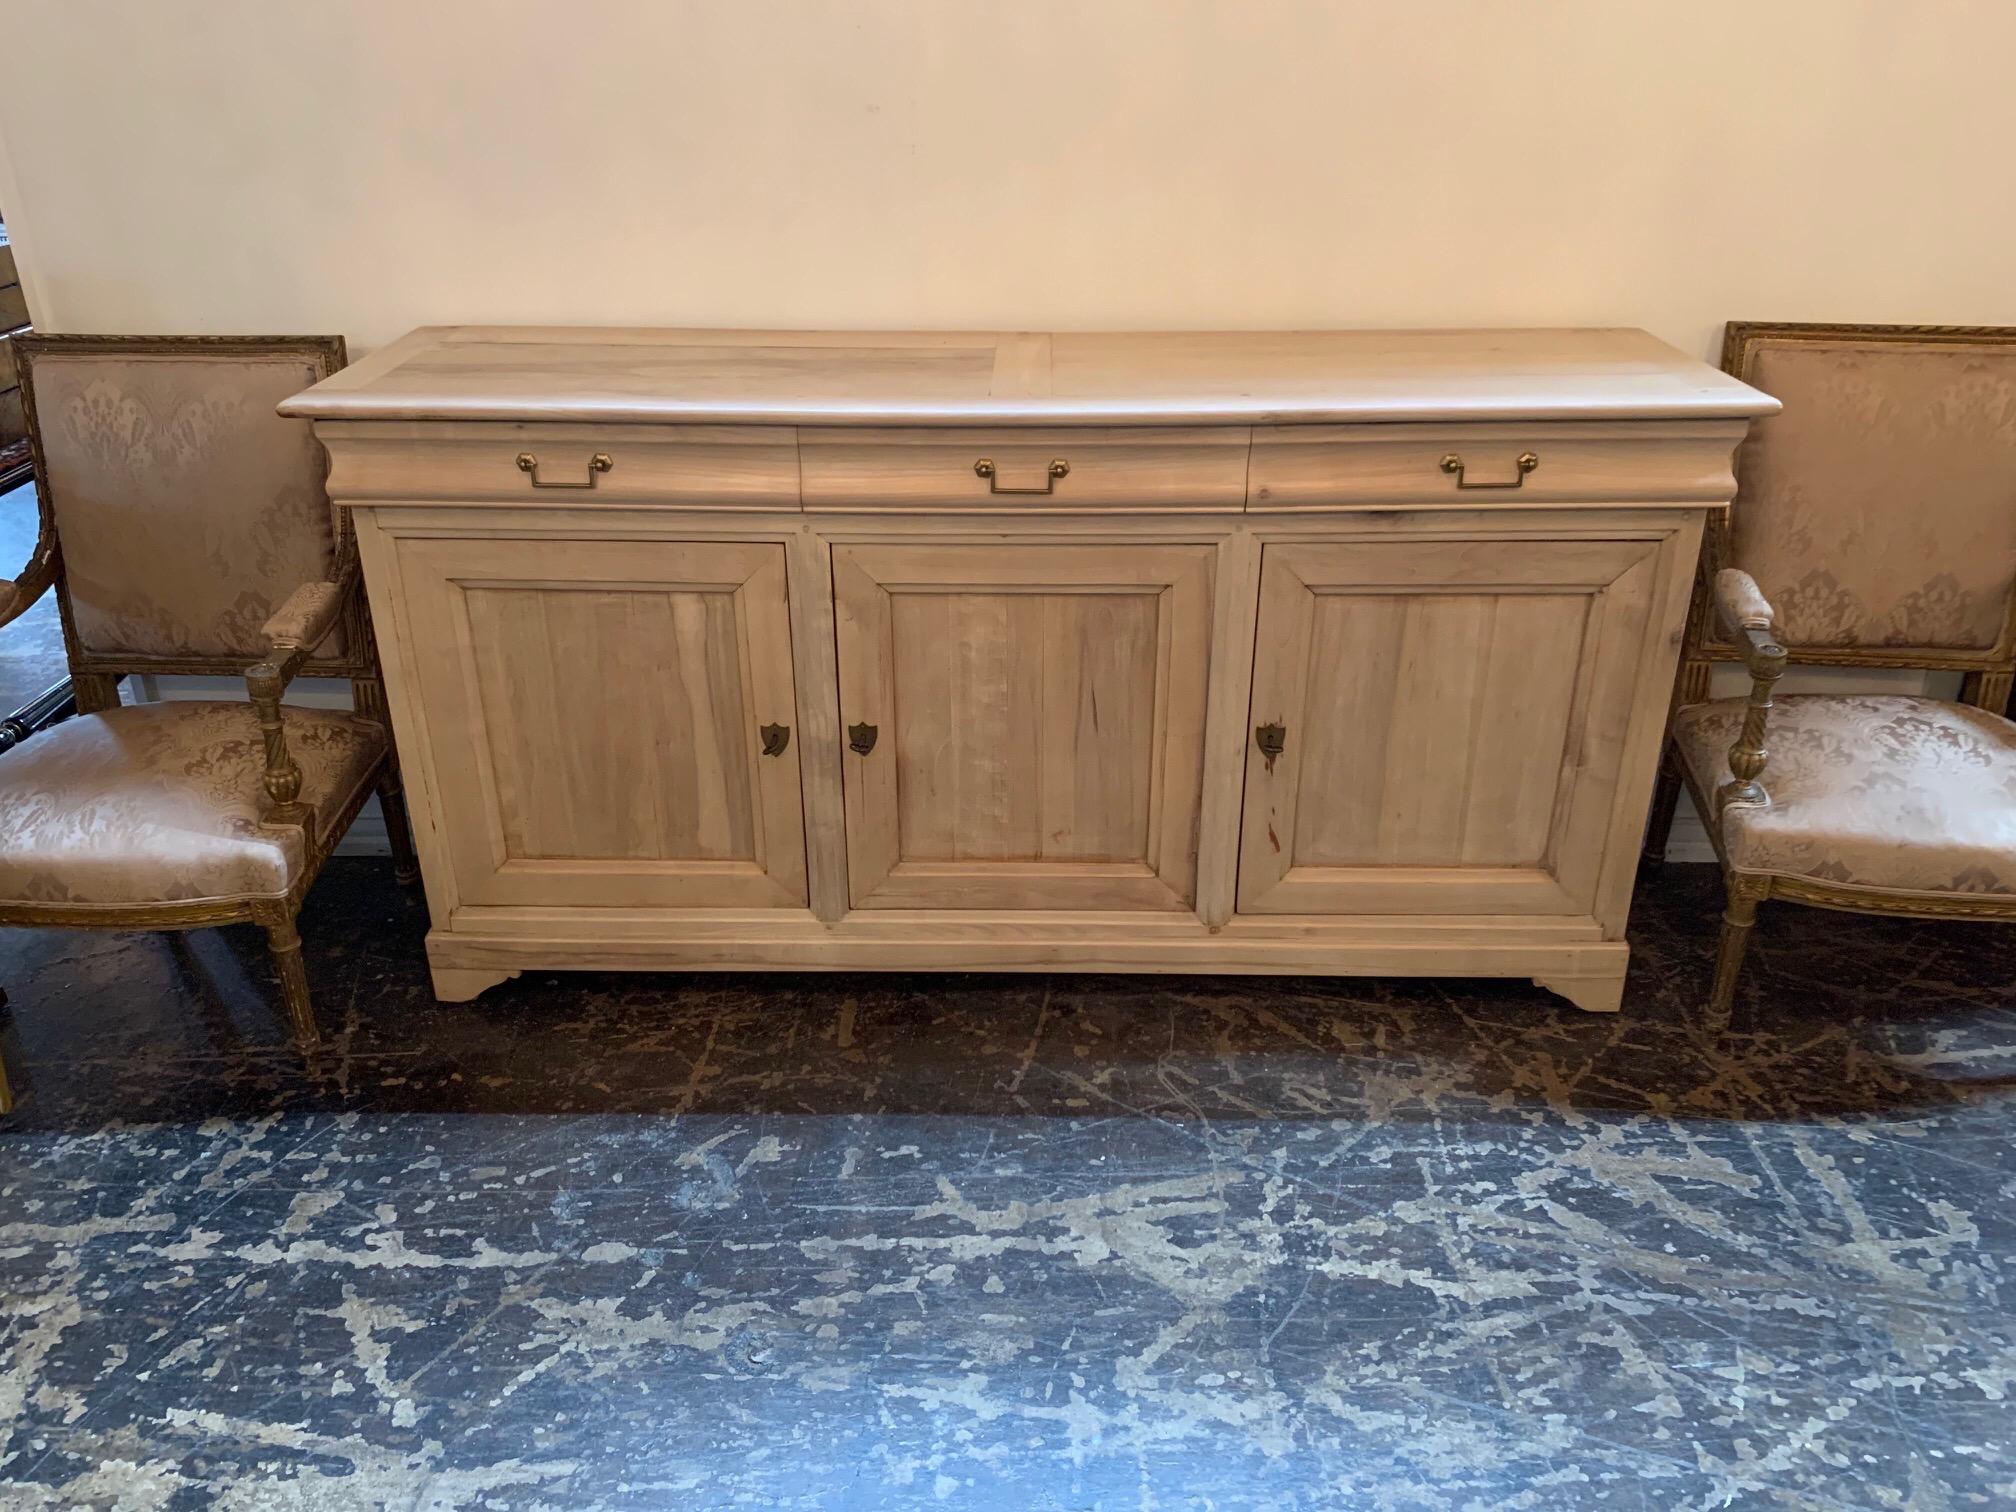 Fabulous 19th century French bleached walnut buffet. Beautiful clean lines and exceptional finish on this piece. Nice amount of storage as well. Gorgeous and great for a variety of decors!!